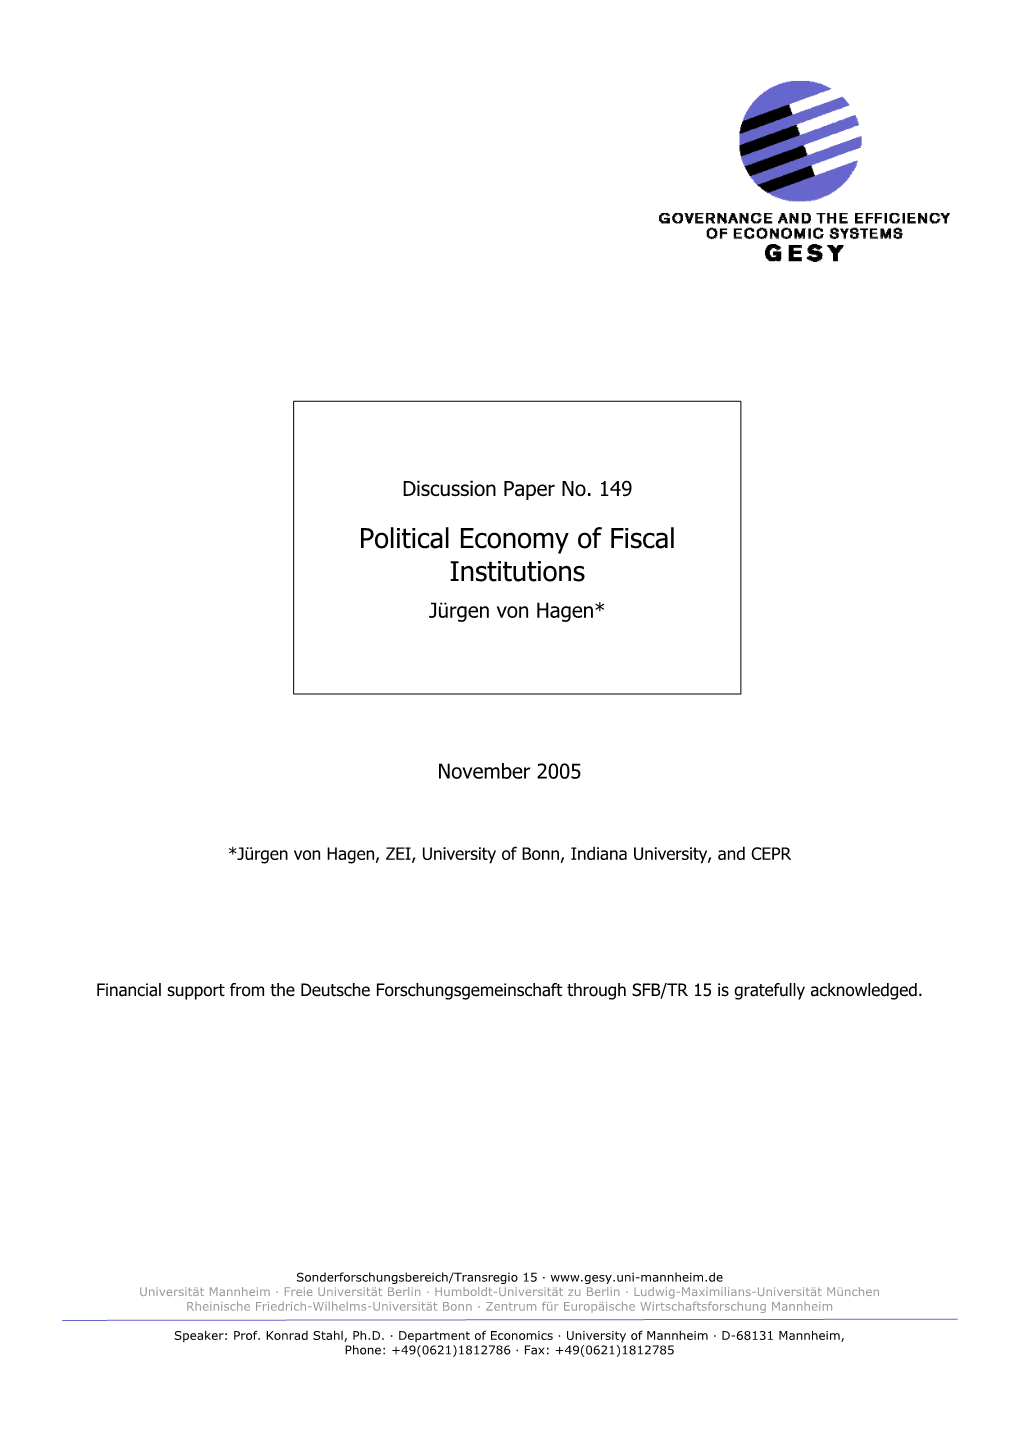 Political Economy of Fiscal Institutions